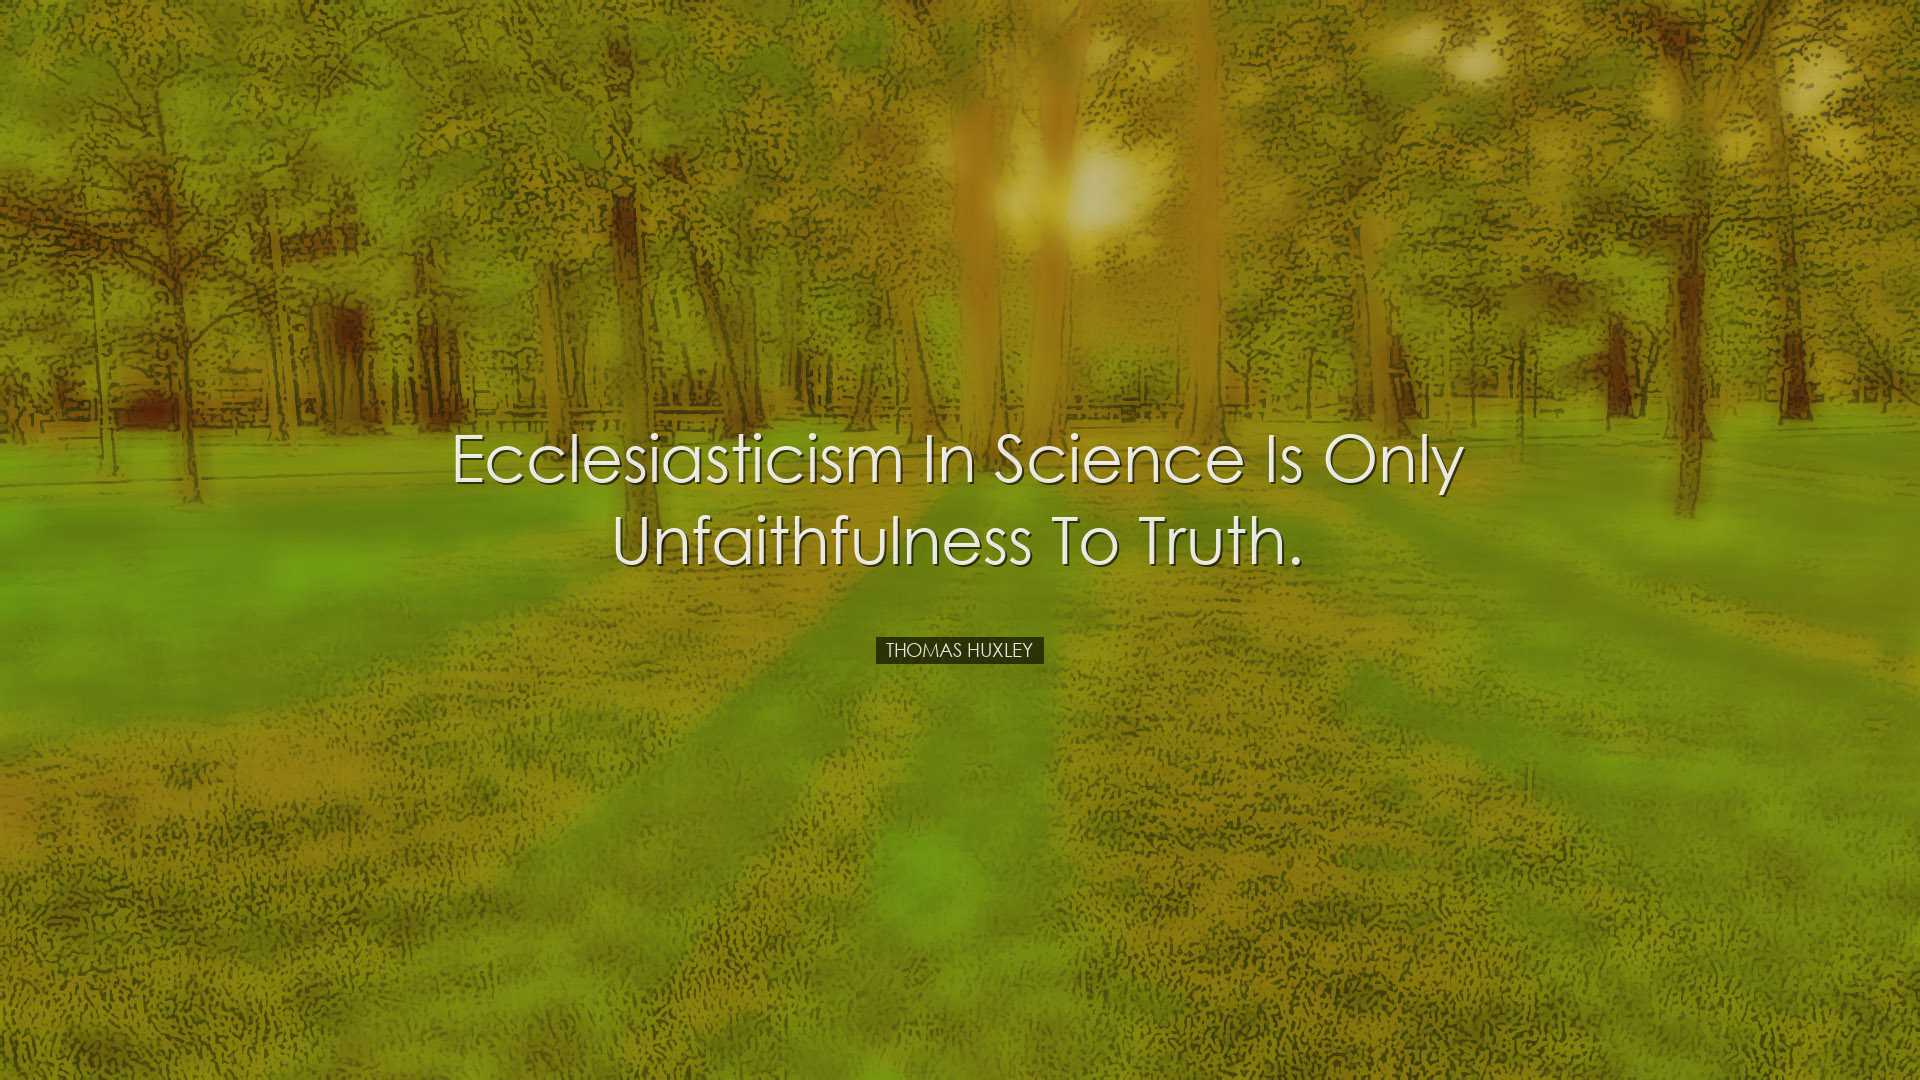 Ecclesiasticism in science is only unfaithfulness to truth. - Thom